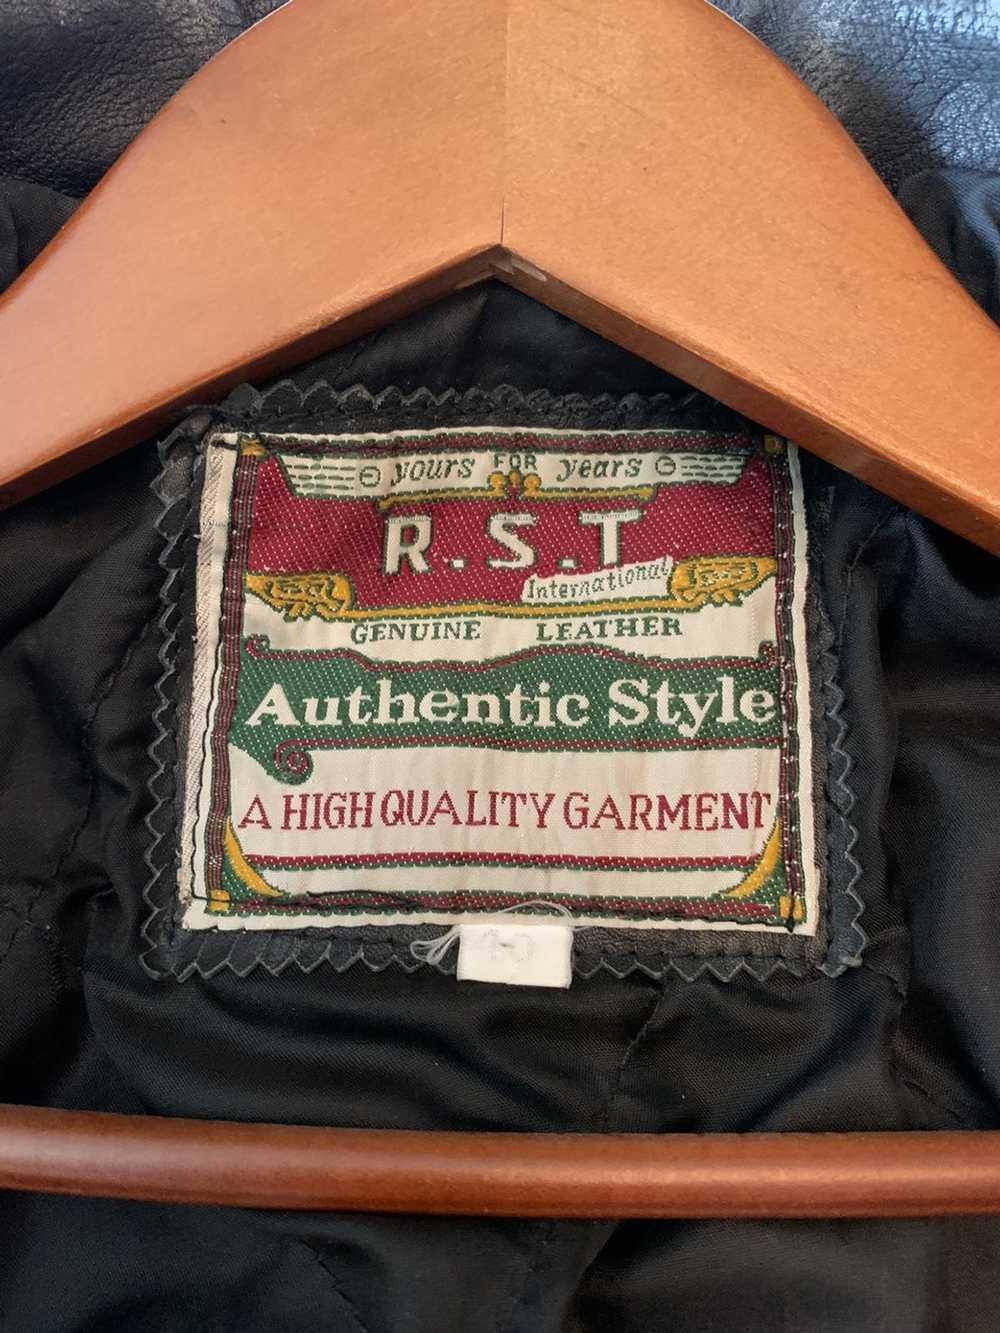 Authentic × Genuine Leather R.S.T International G… - image 8